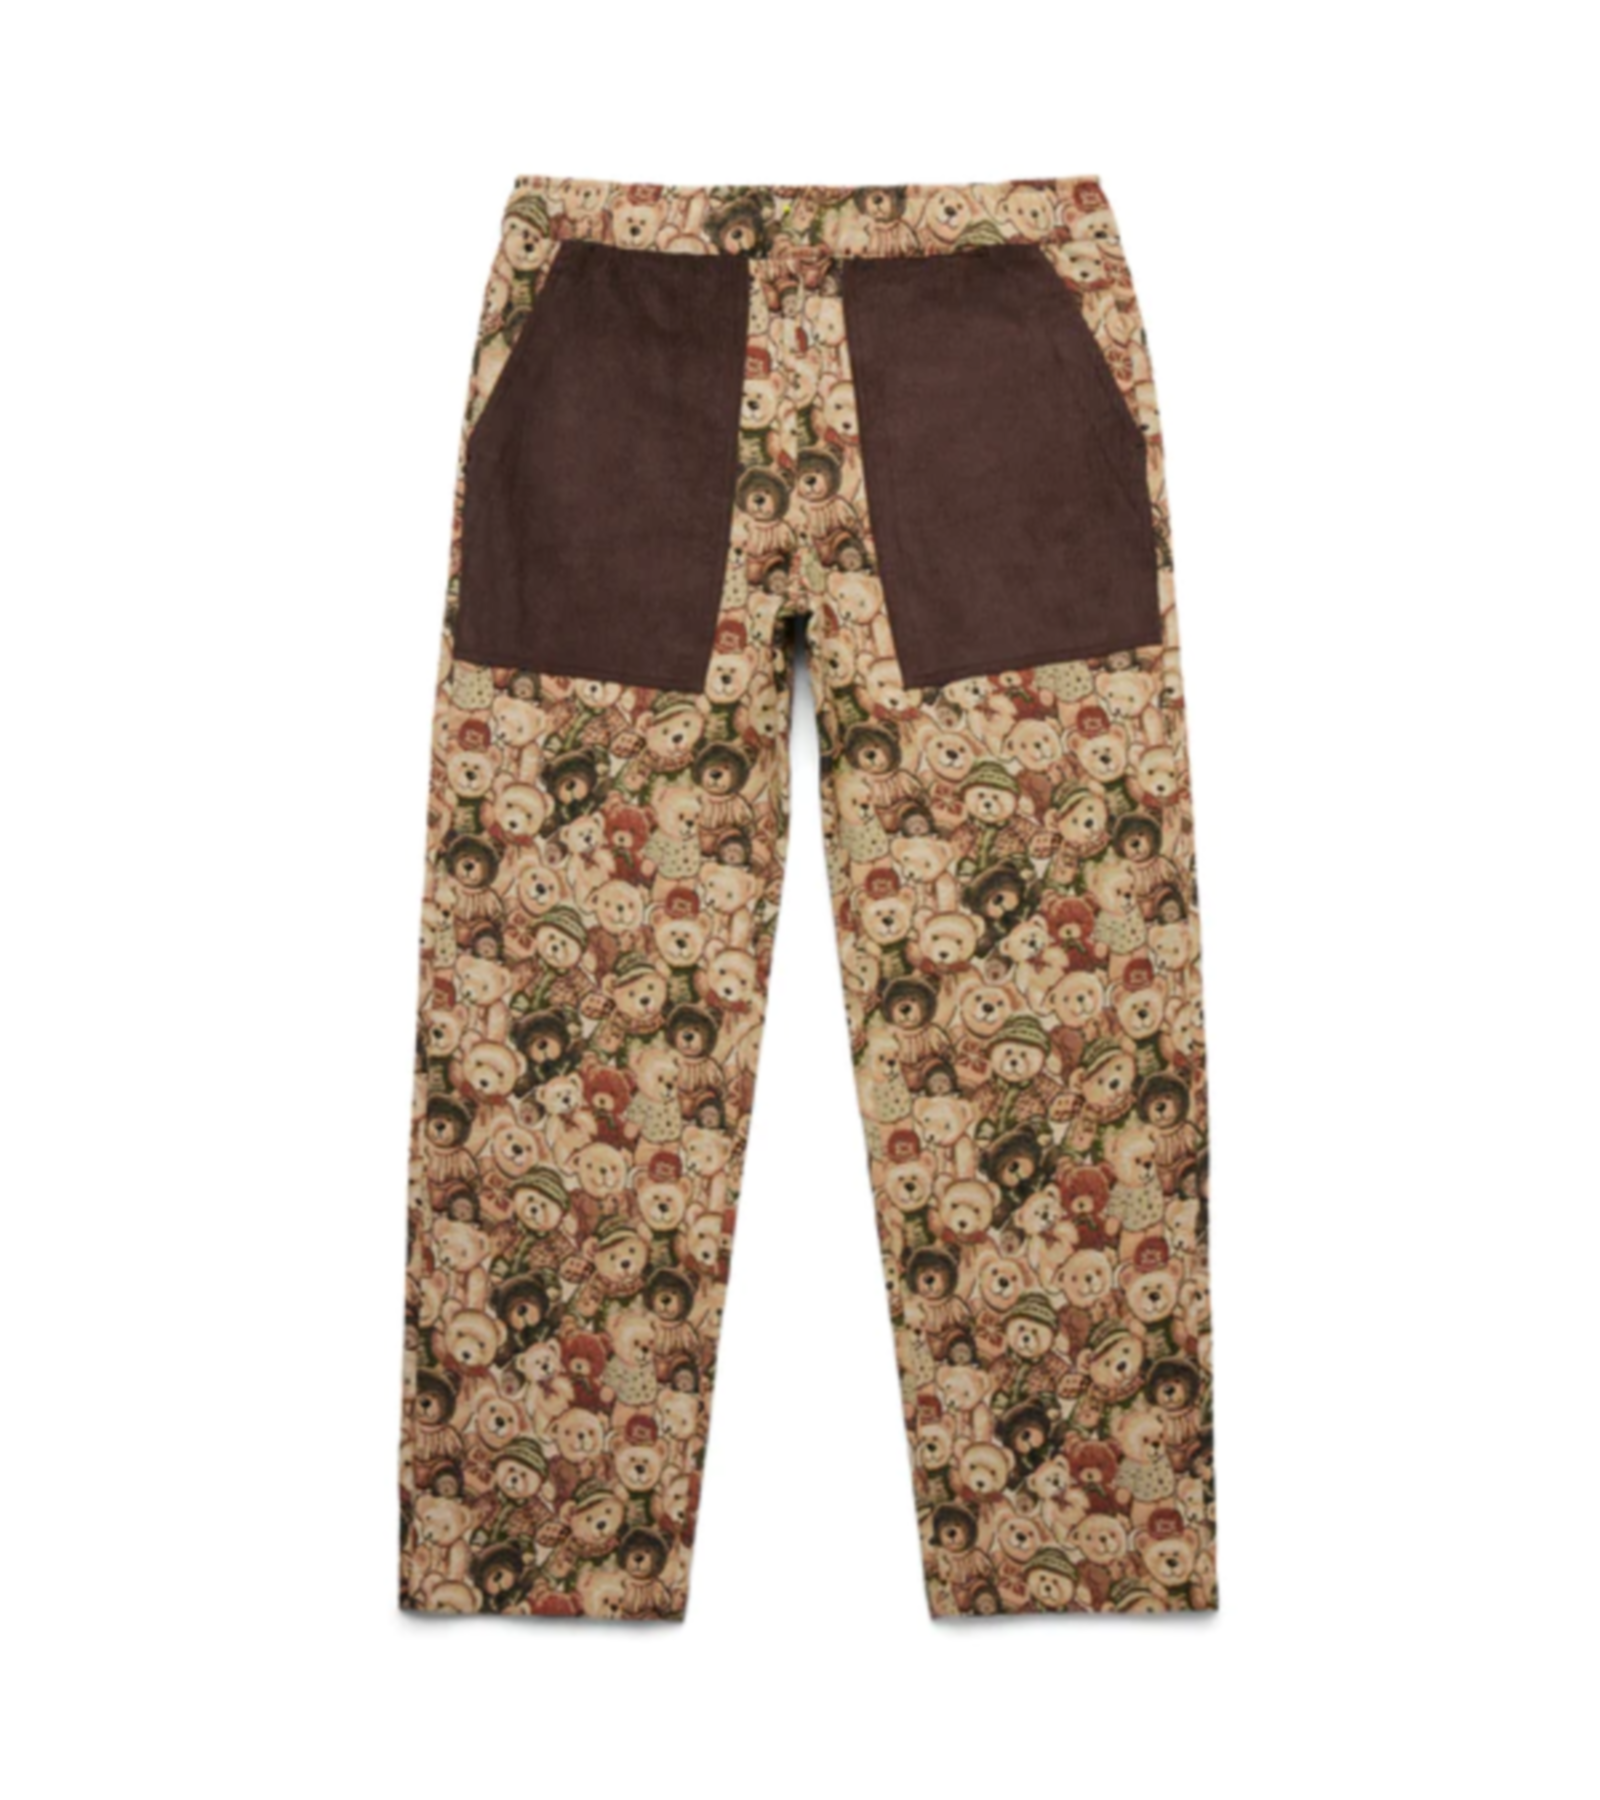 SOFTCORE EASY TAPESTRY PANT